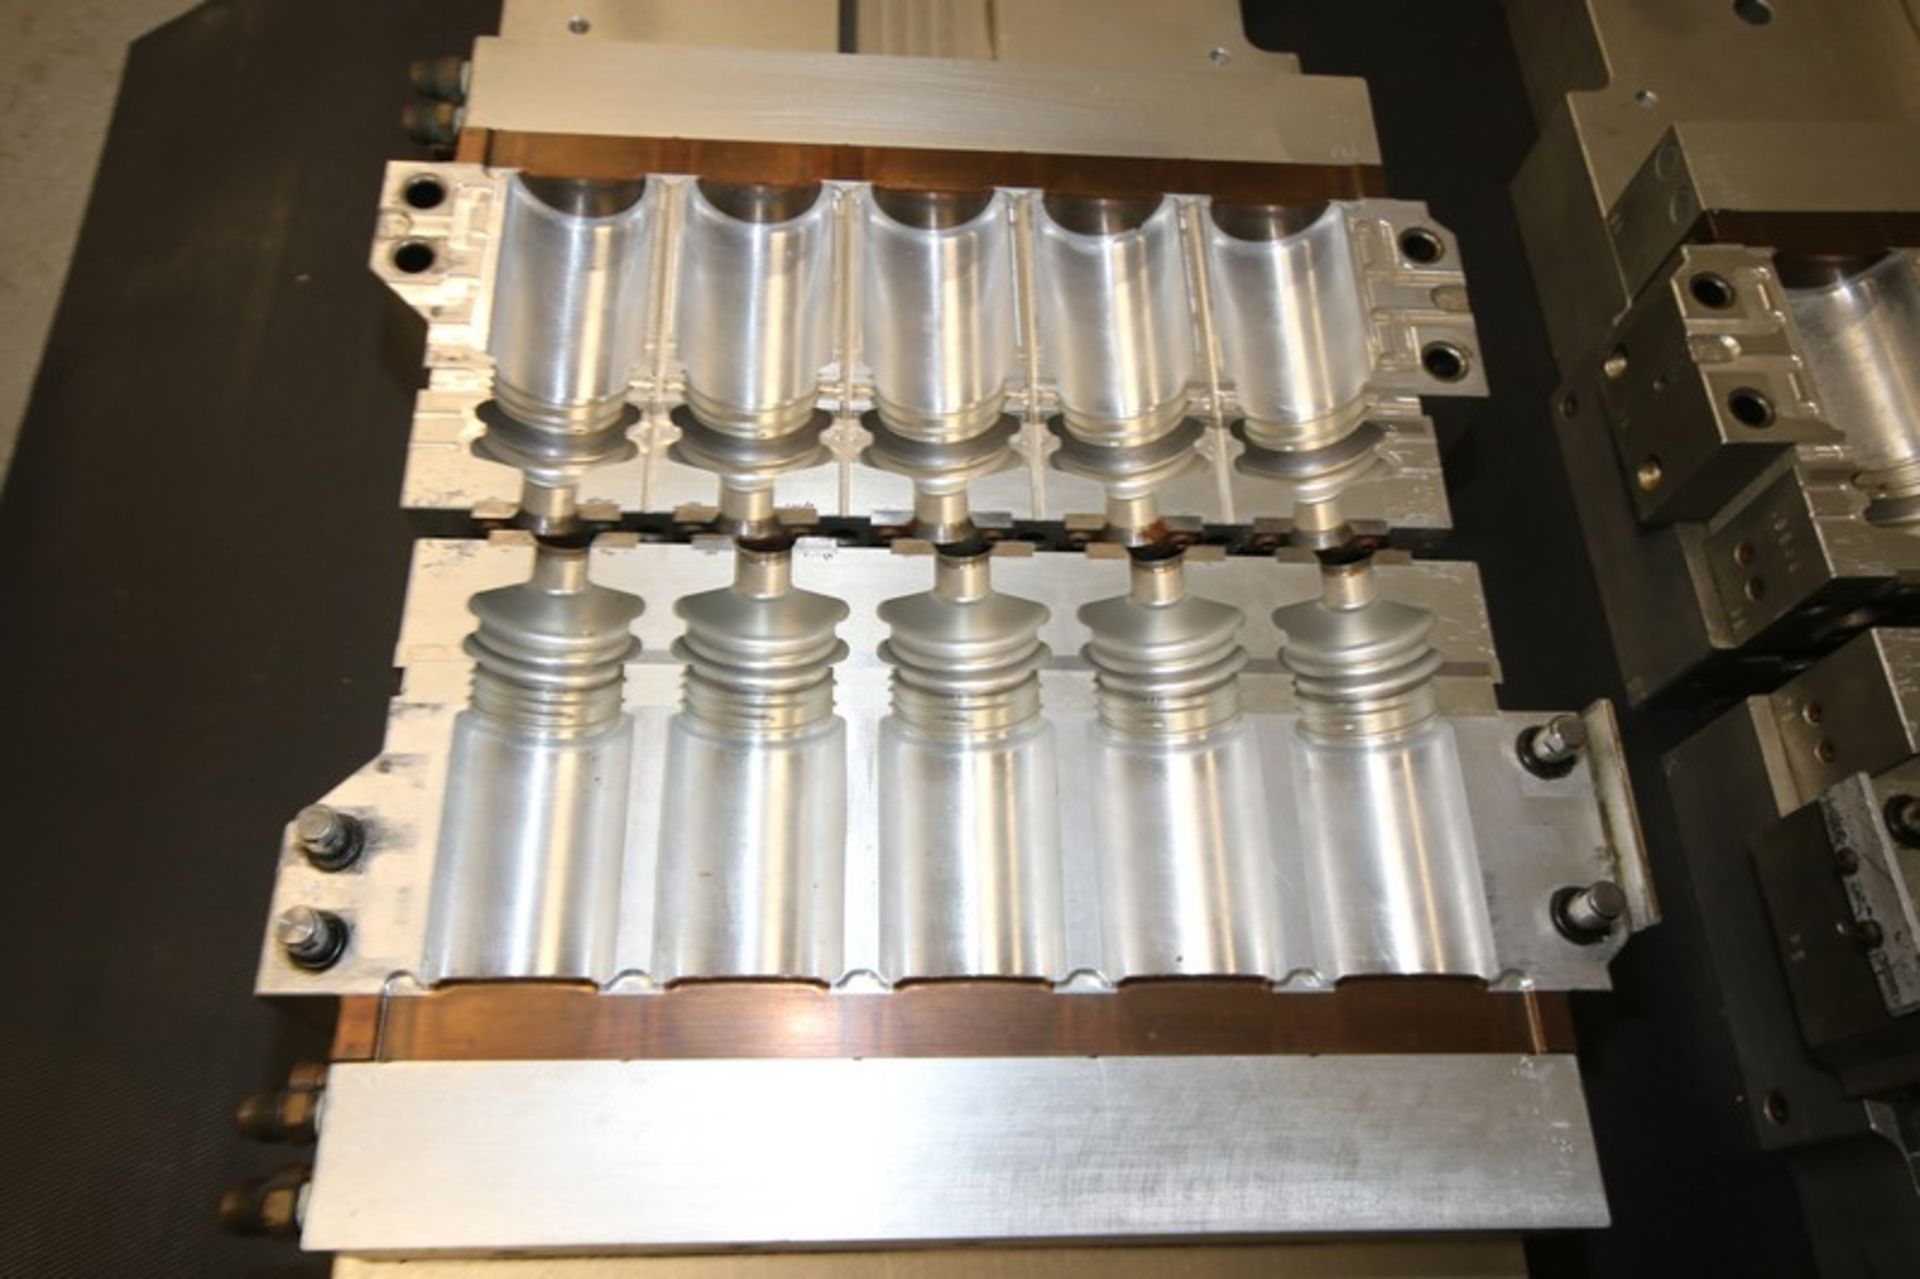 Compact 5-Wide S/S Bottle Molds, S/N 905.851.7724/859.371.3250, Overall Dims.: Aprox. 18-1/4" L x - Bild 5 aus 9